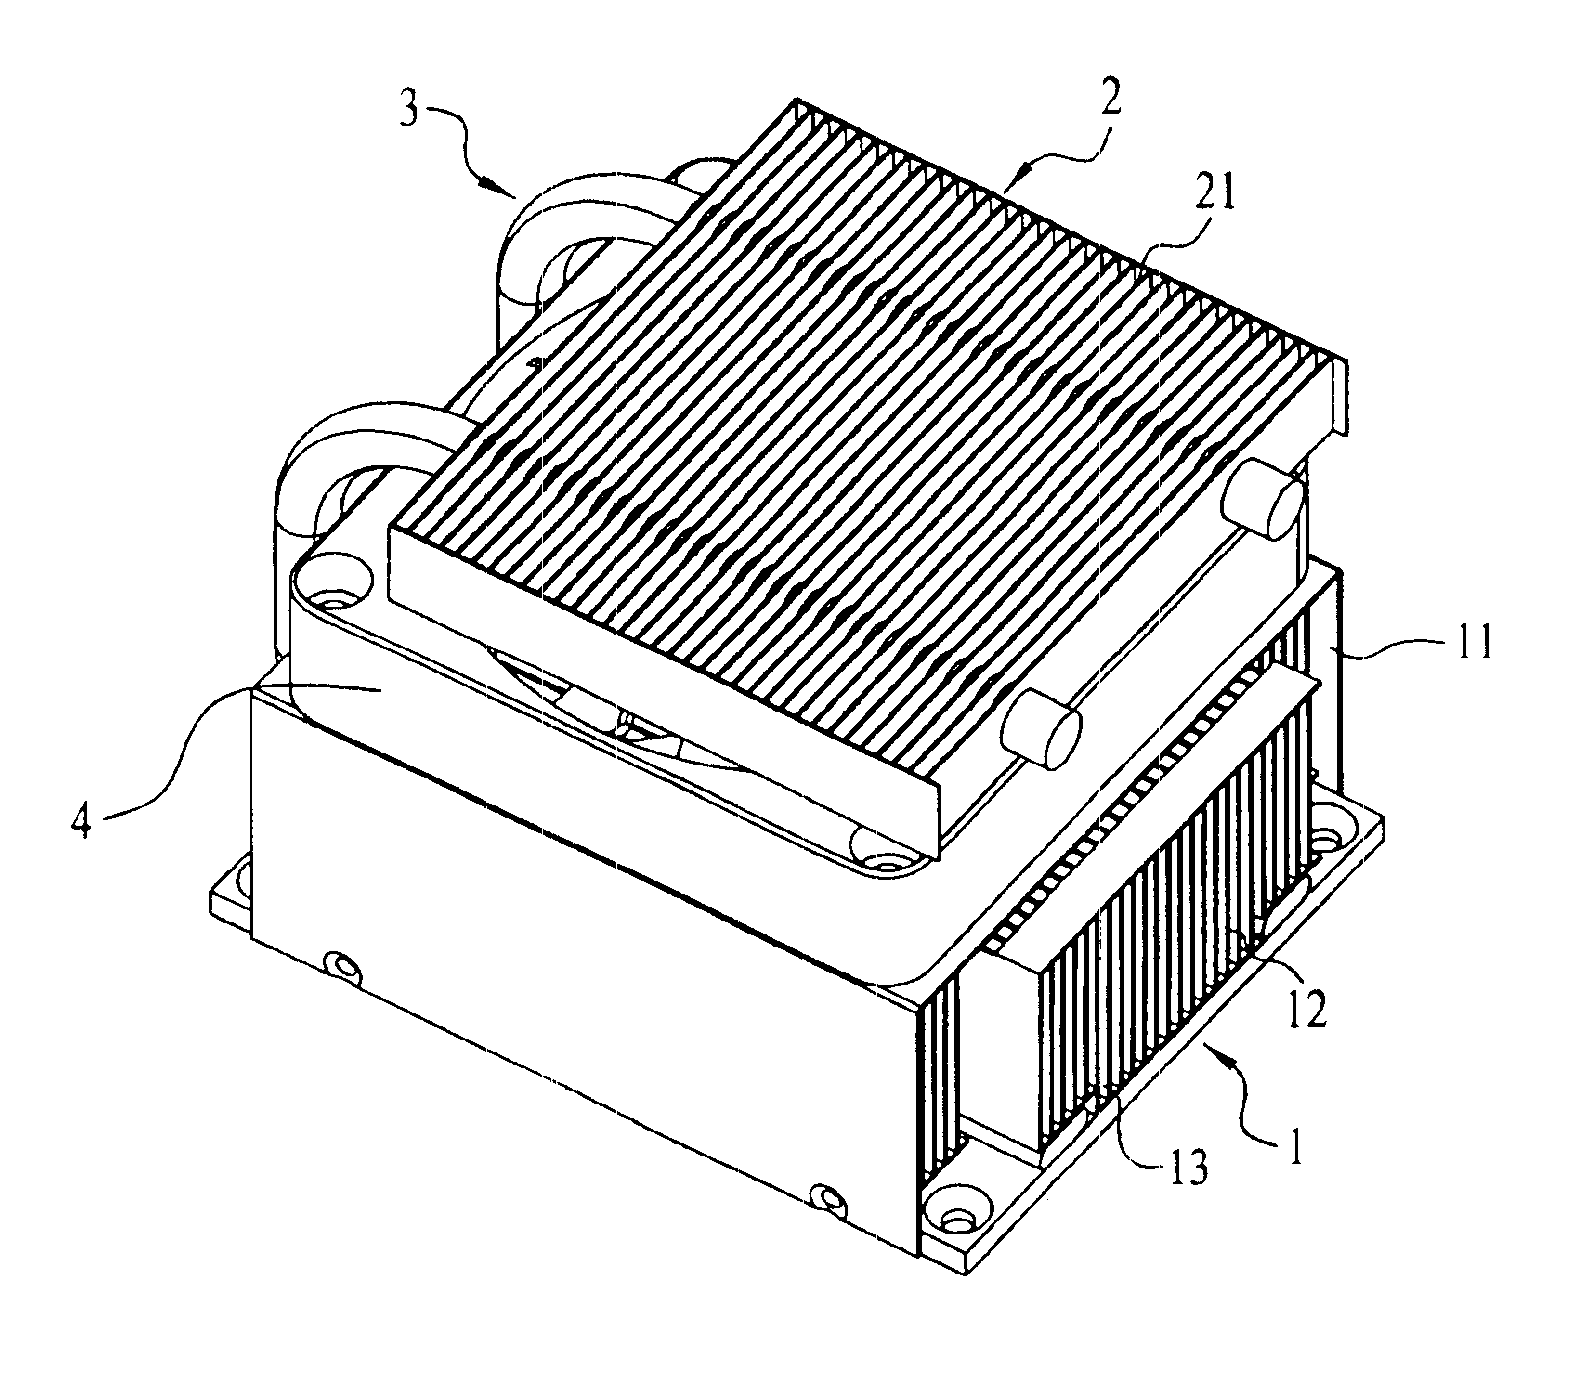 Heat sink assembly with heat pipe